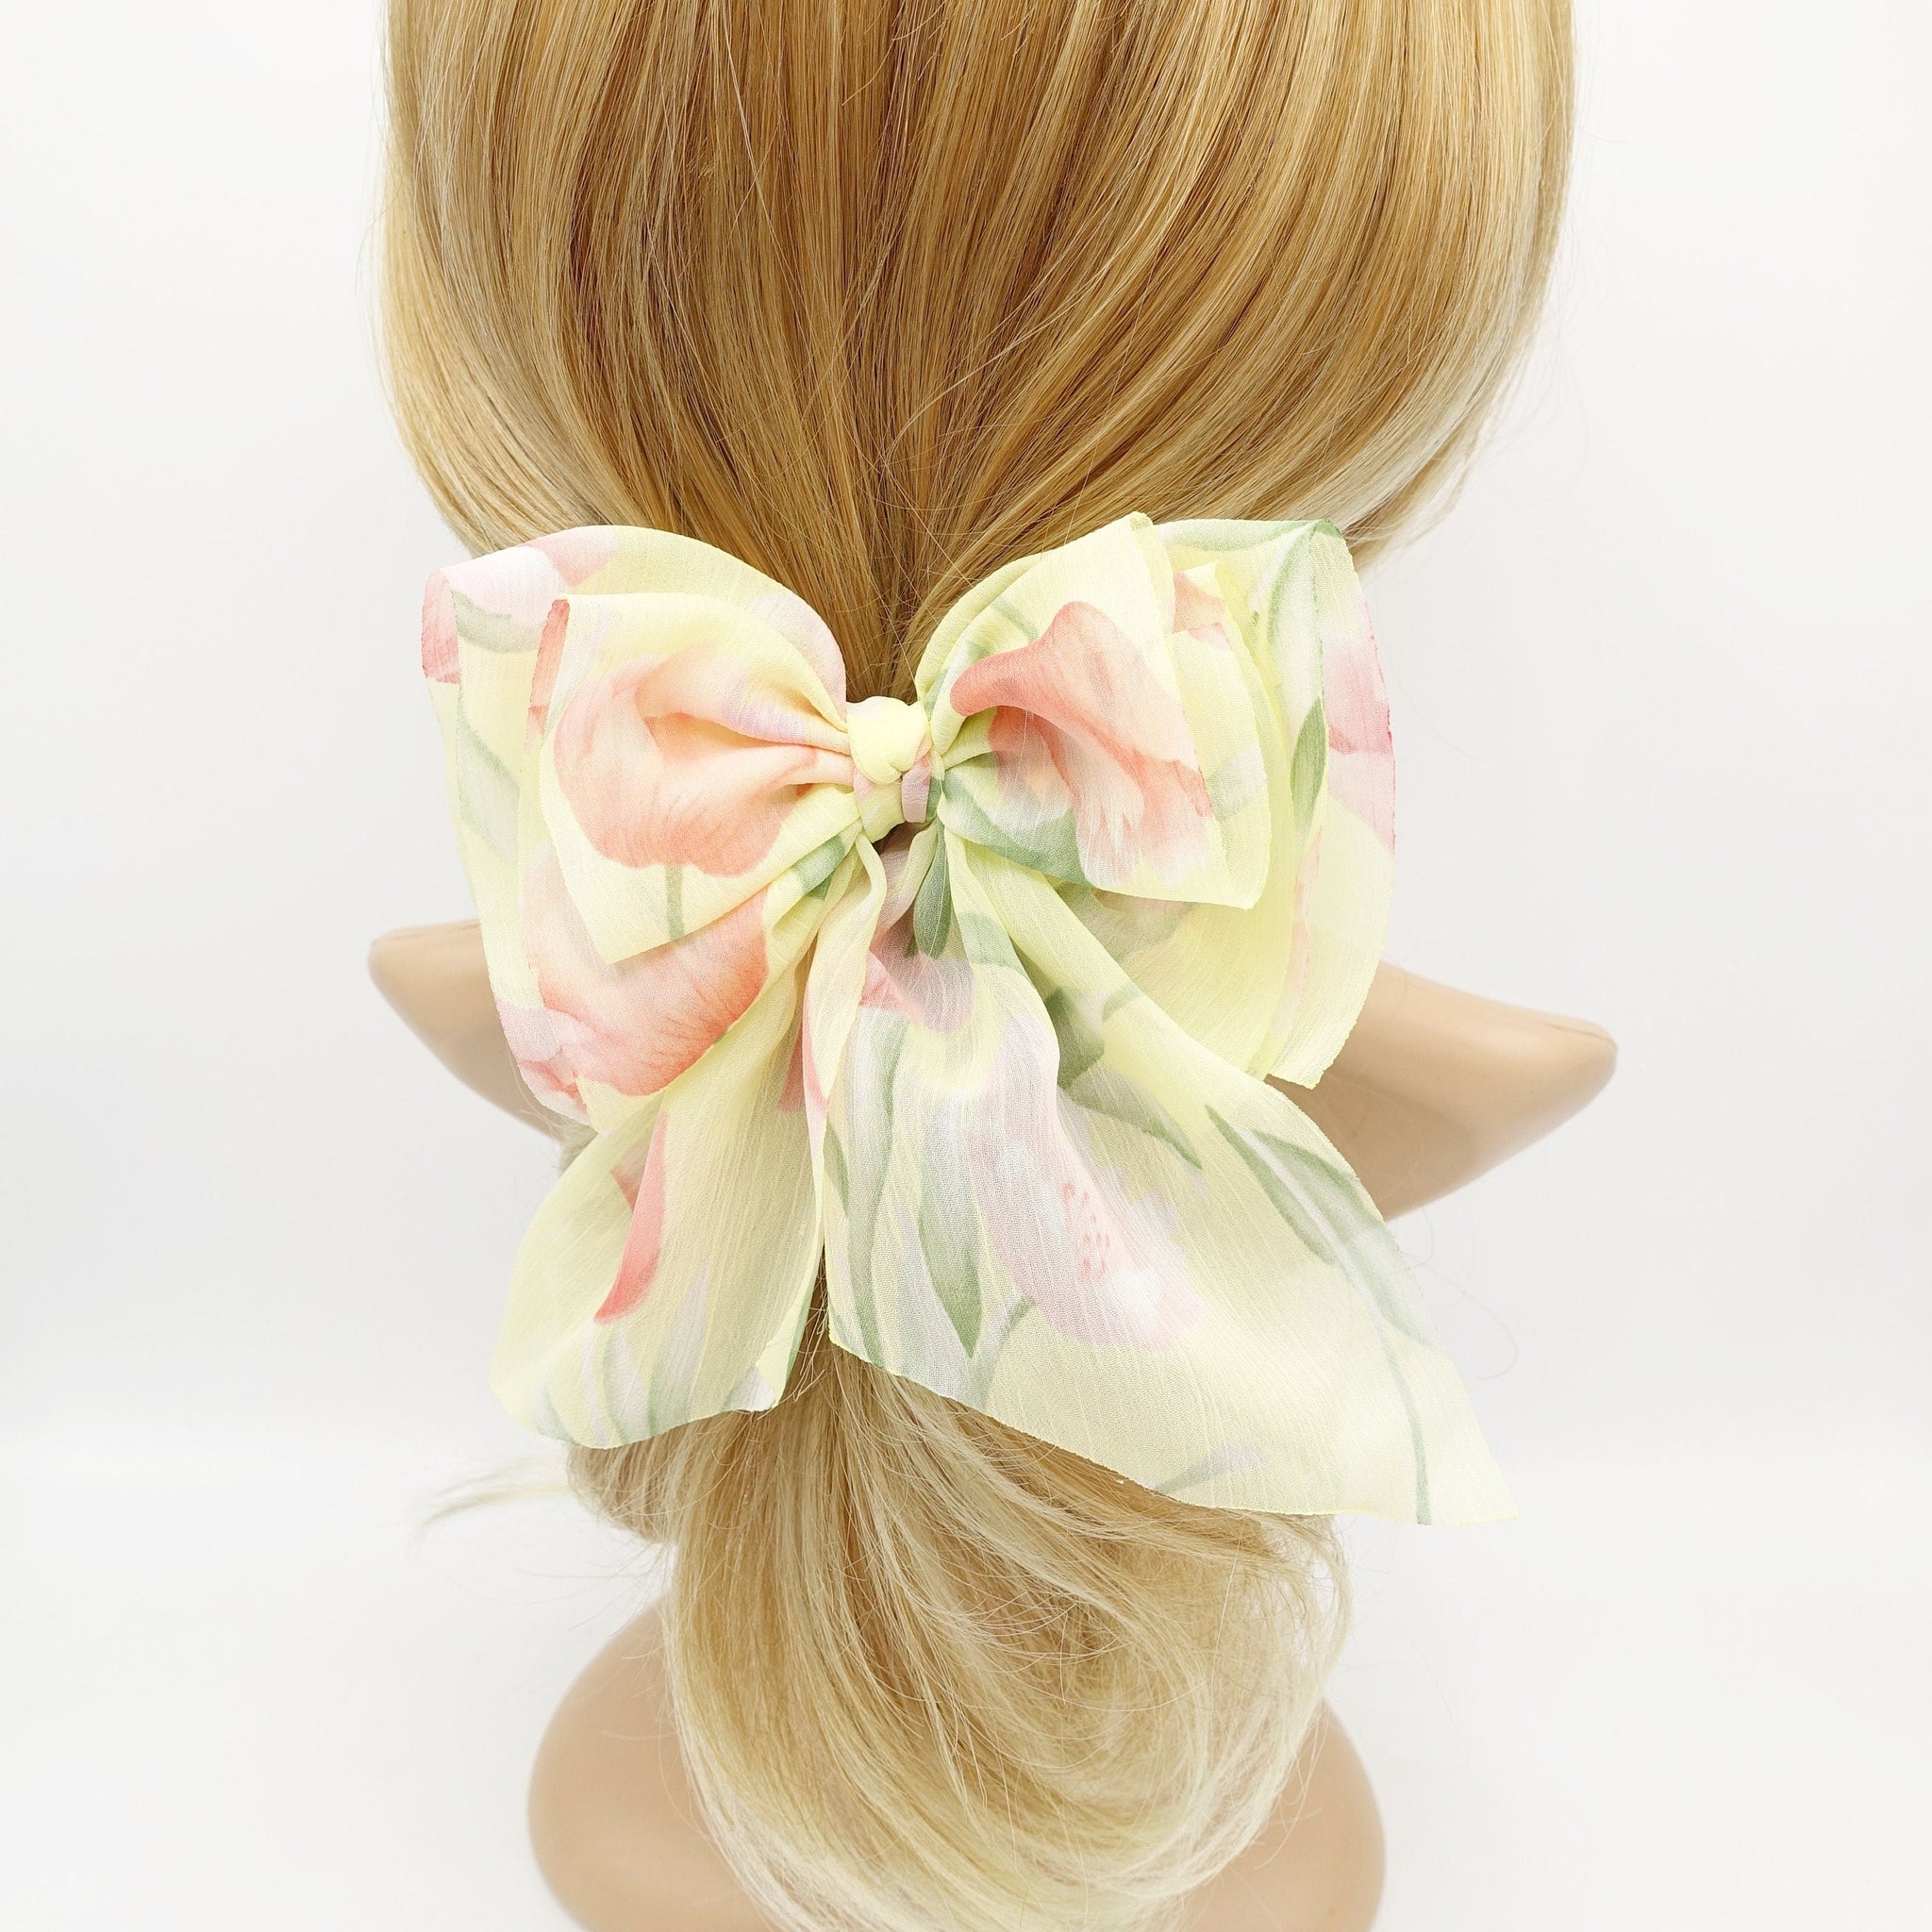 veryshine.com Barrette (Bow) Yellow Floral hair bow Spring floral tulip flower print chiffon hair accessory for women